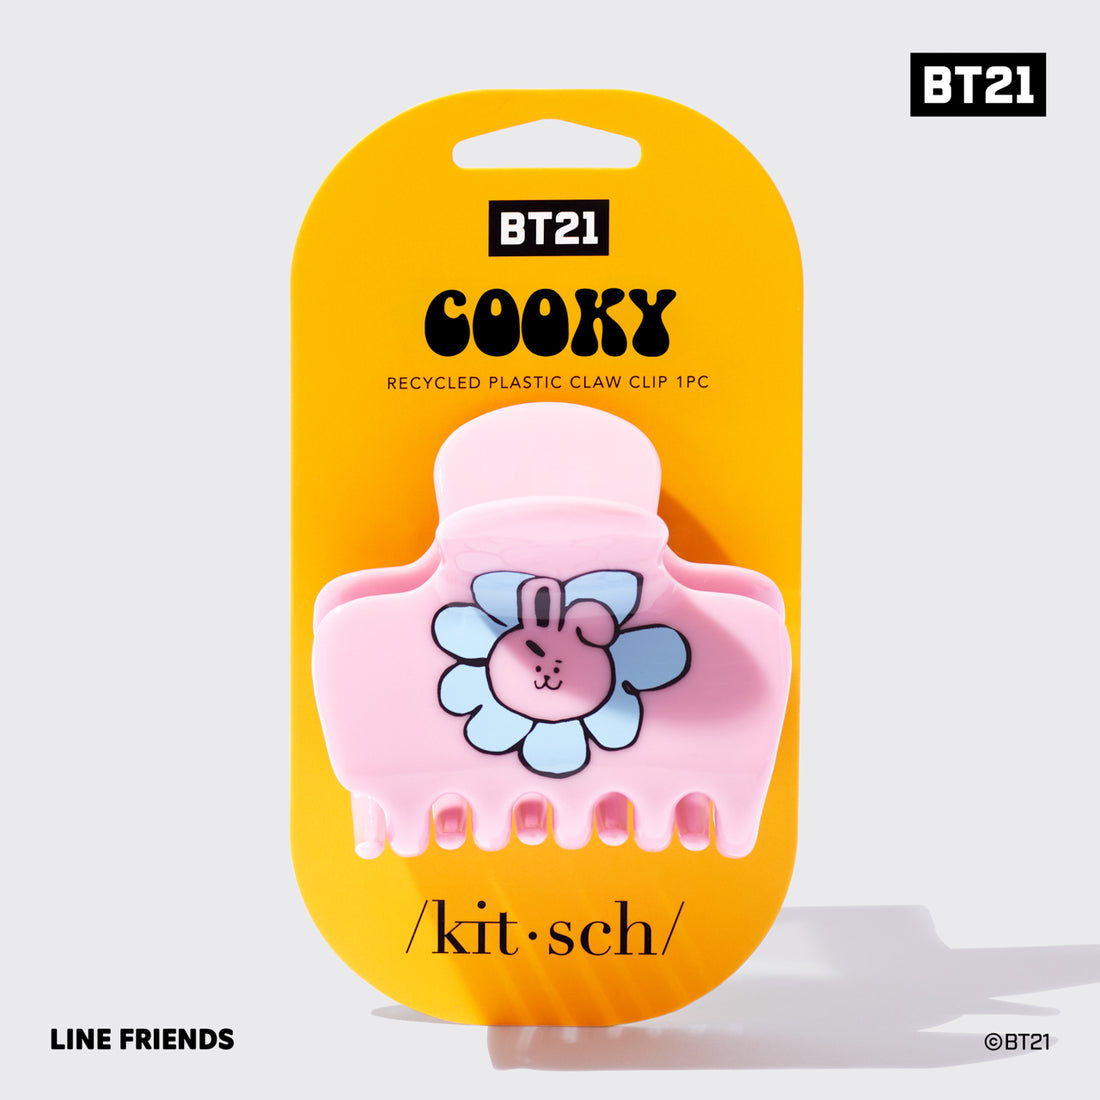 BT21 x Kitsch Recycled Plastic Puffy Claw Clip 1pc - Cooky